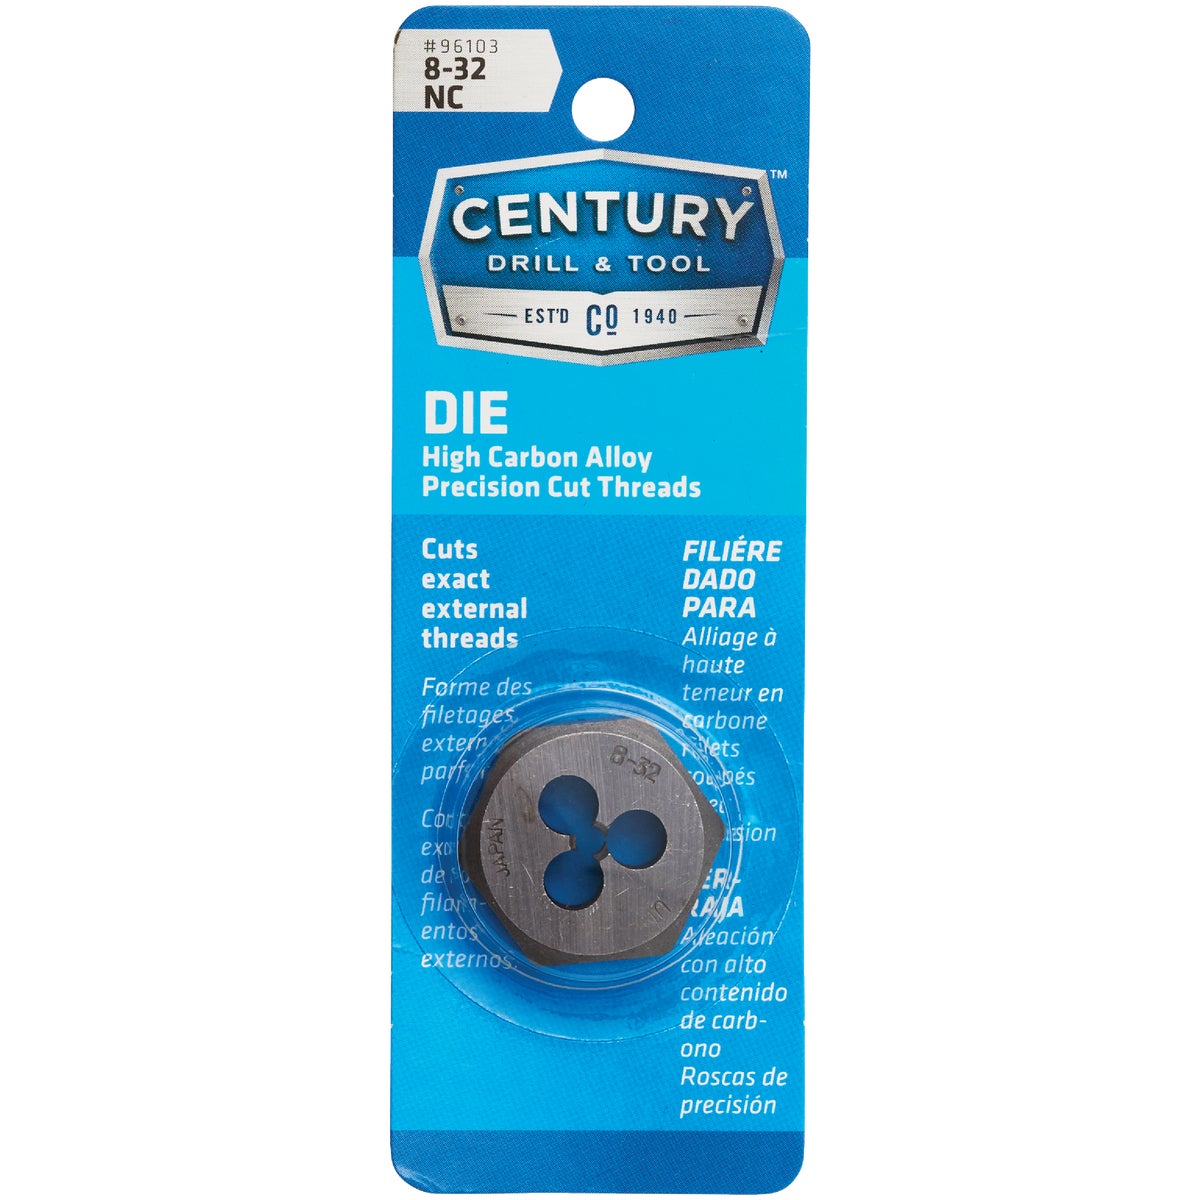 Century Drill & Tool 8-32 National Coarse 1 In. Across Flats Fractional Hexagon Die